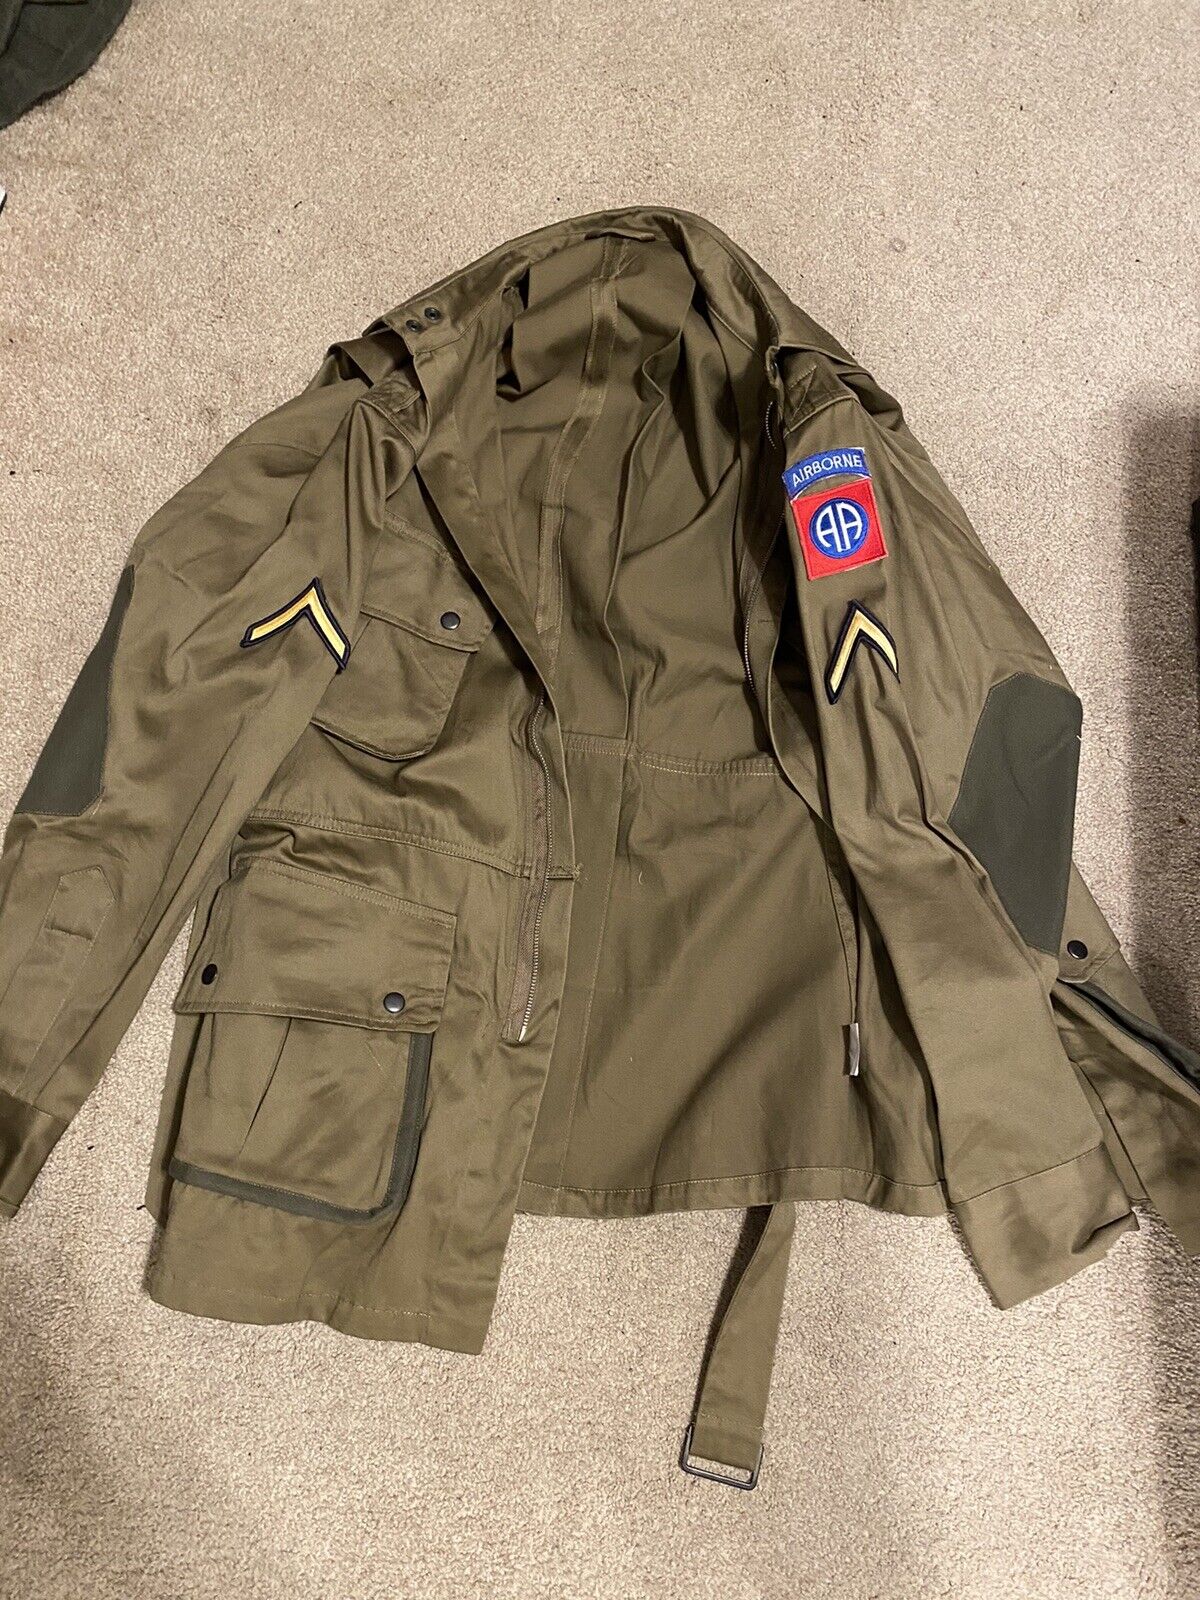 Reproduction US WWII Paratrooper Jacket W/Insignia Size 48R